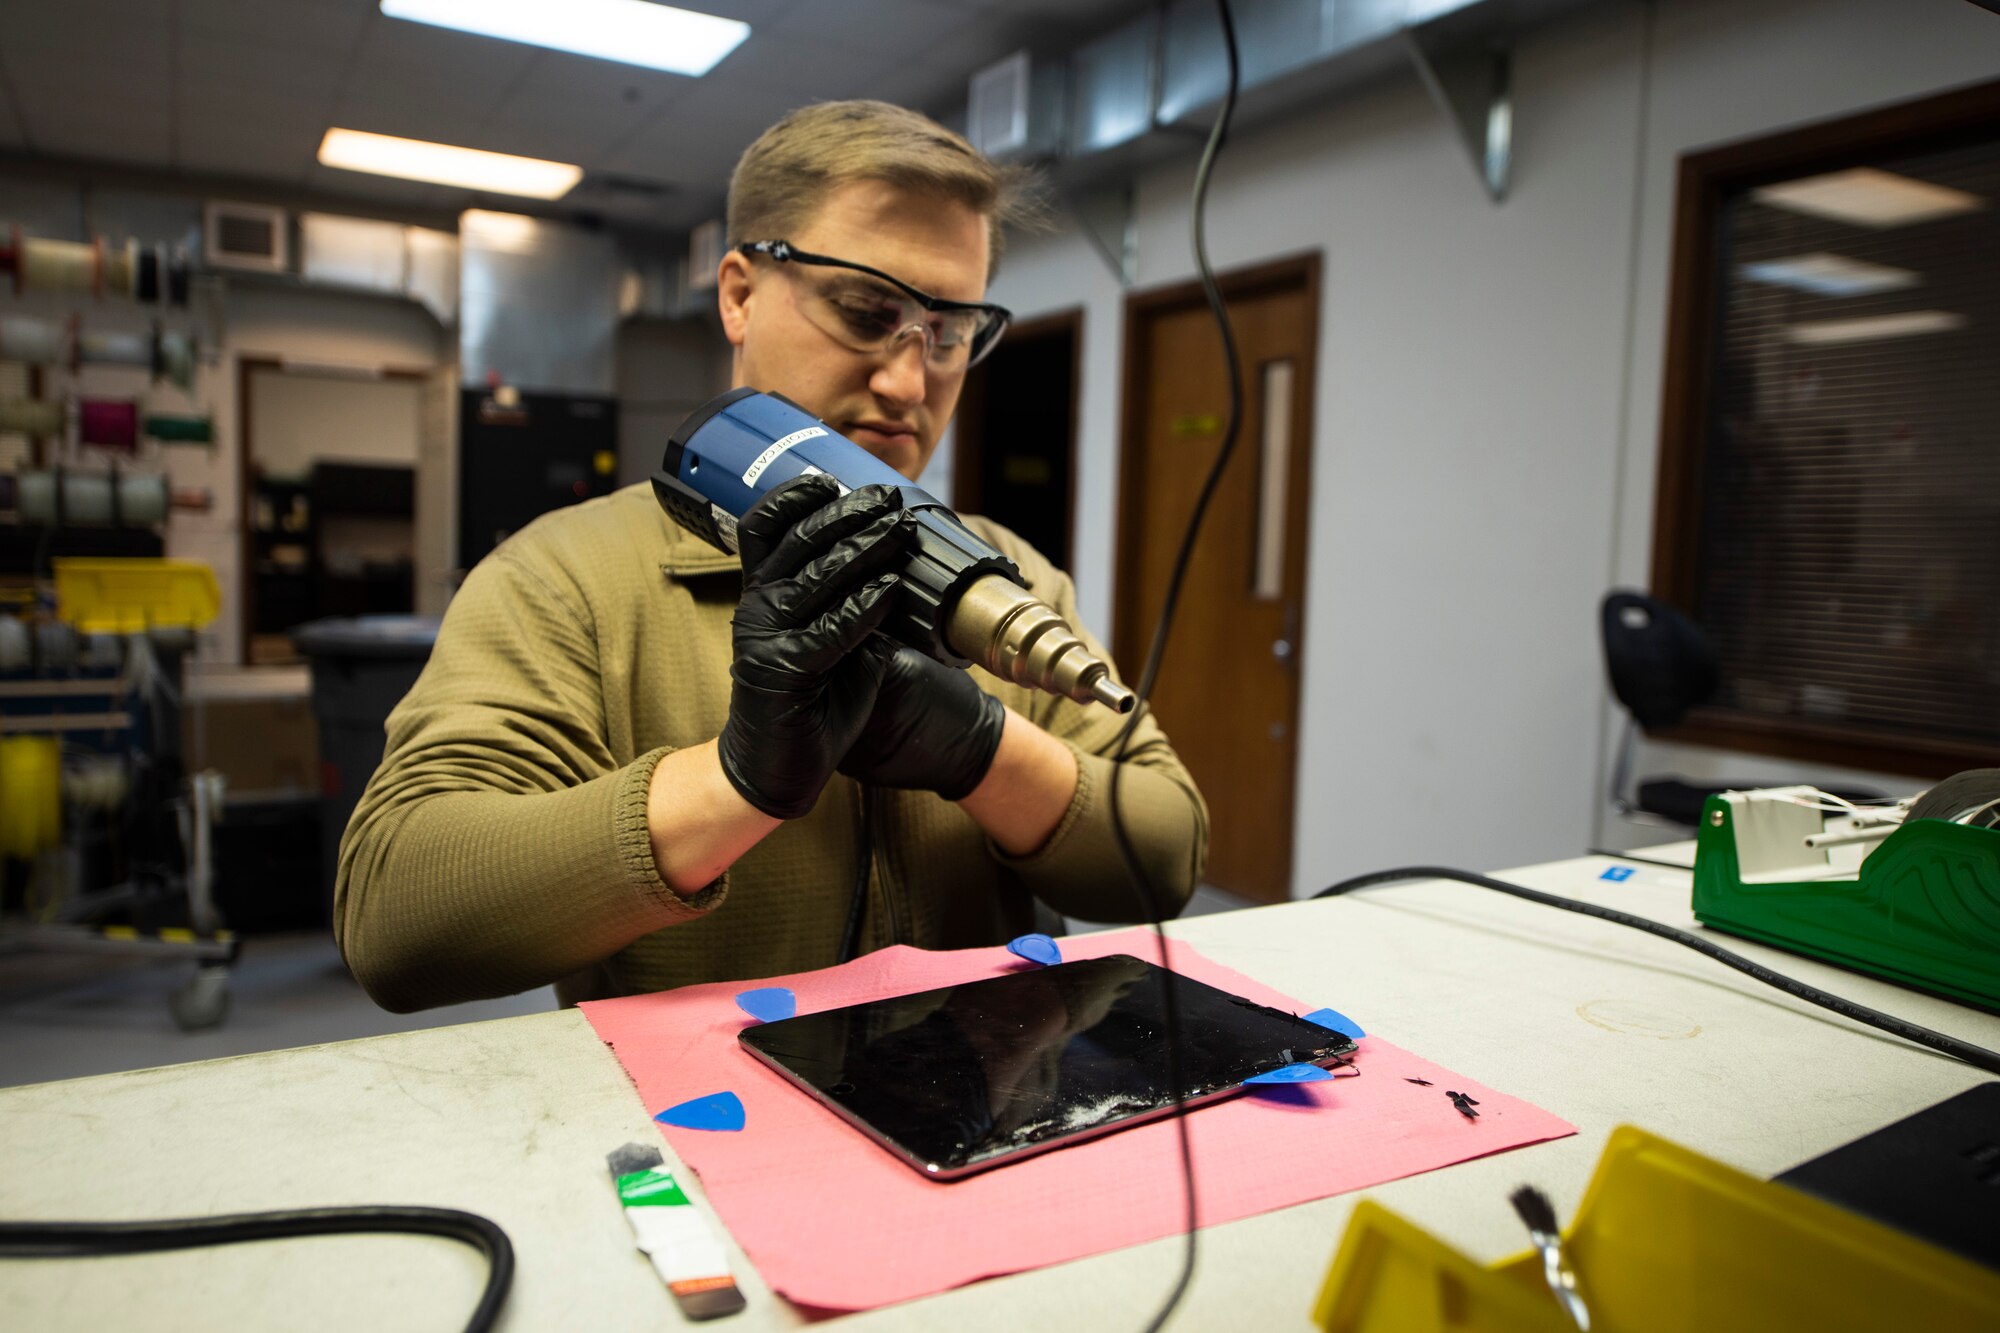 A photo of an Airman turning on heating equipment for electronics repair